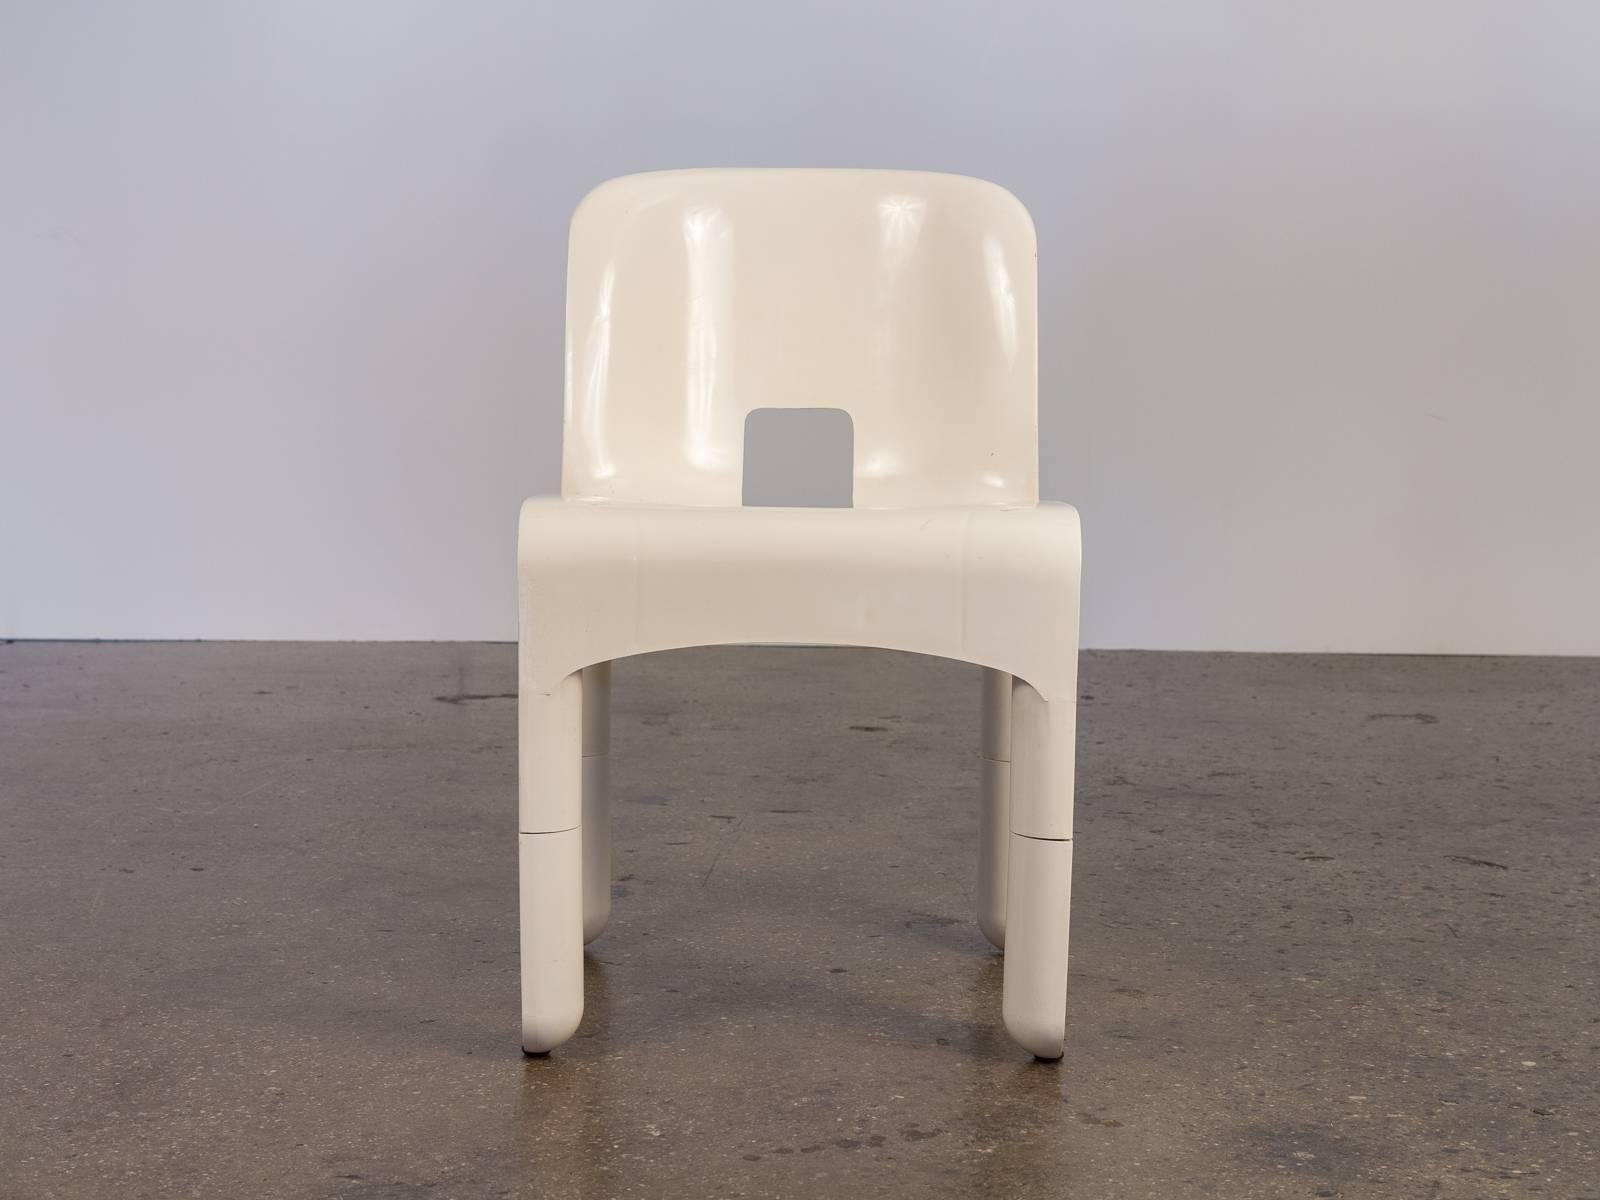 Pre-production model of Joe Colombo's iconic 1967 Sedia Universale in white injection-molded ABS plastic. Intended to serve many purposes, the chair's legs are removable and can be swapped for different heights.

This is a test series model that